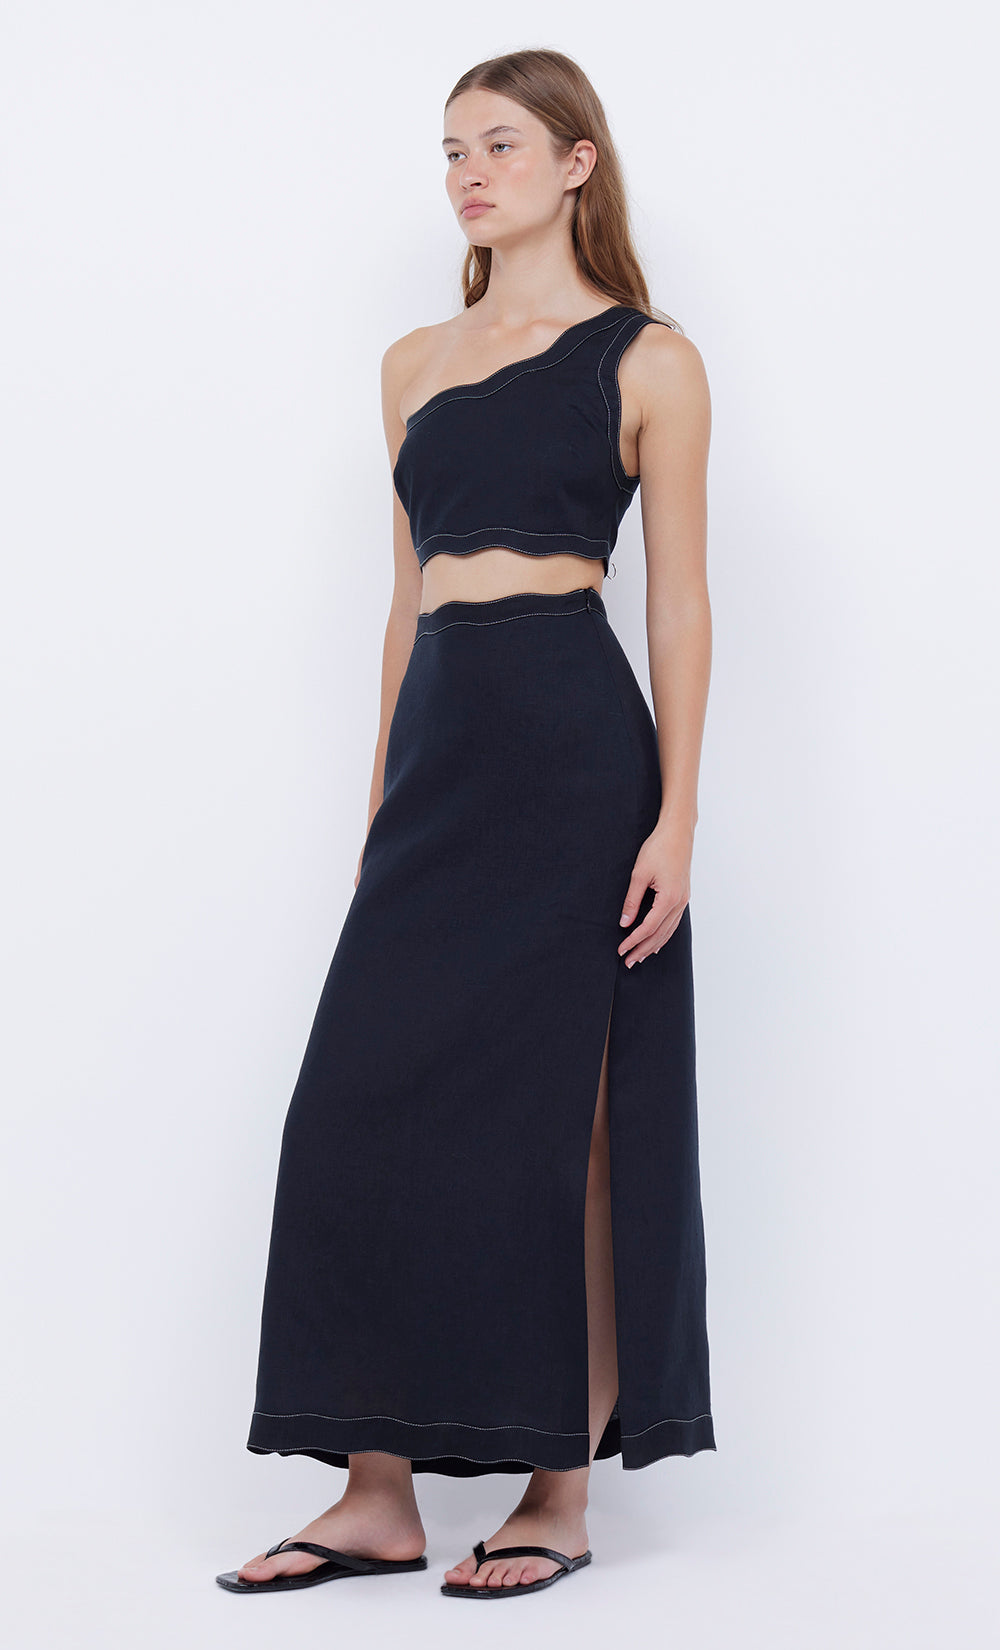 Women's Slit Skirts: 16 Items up to −88%